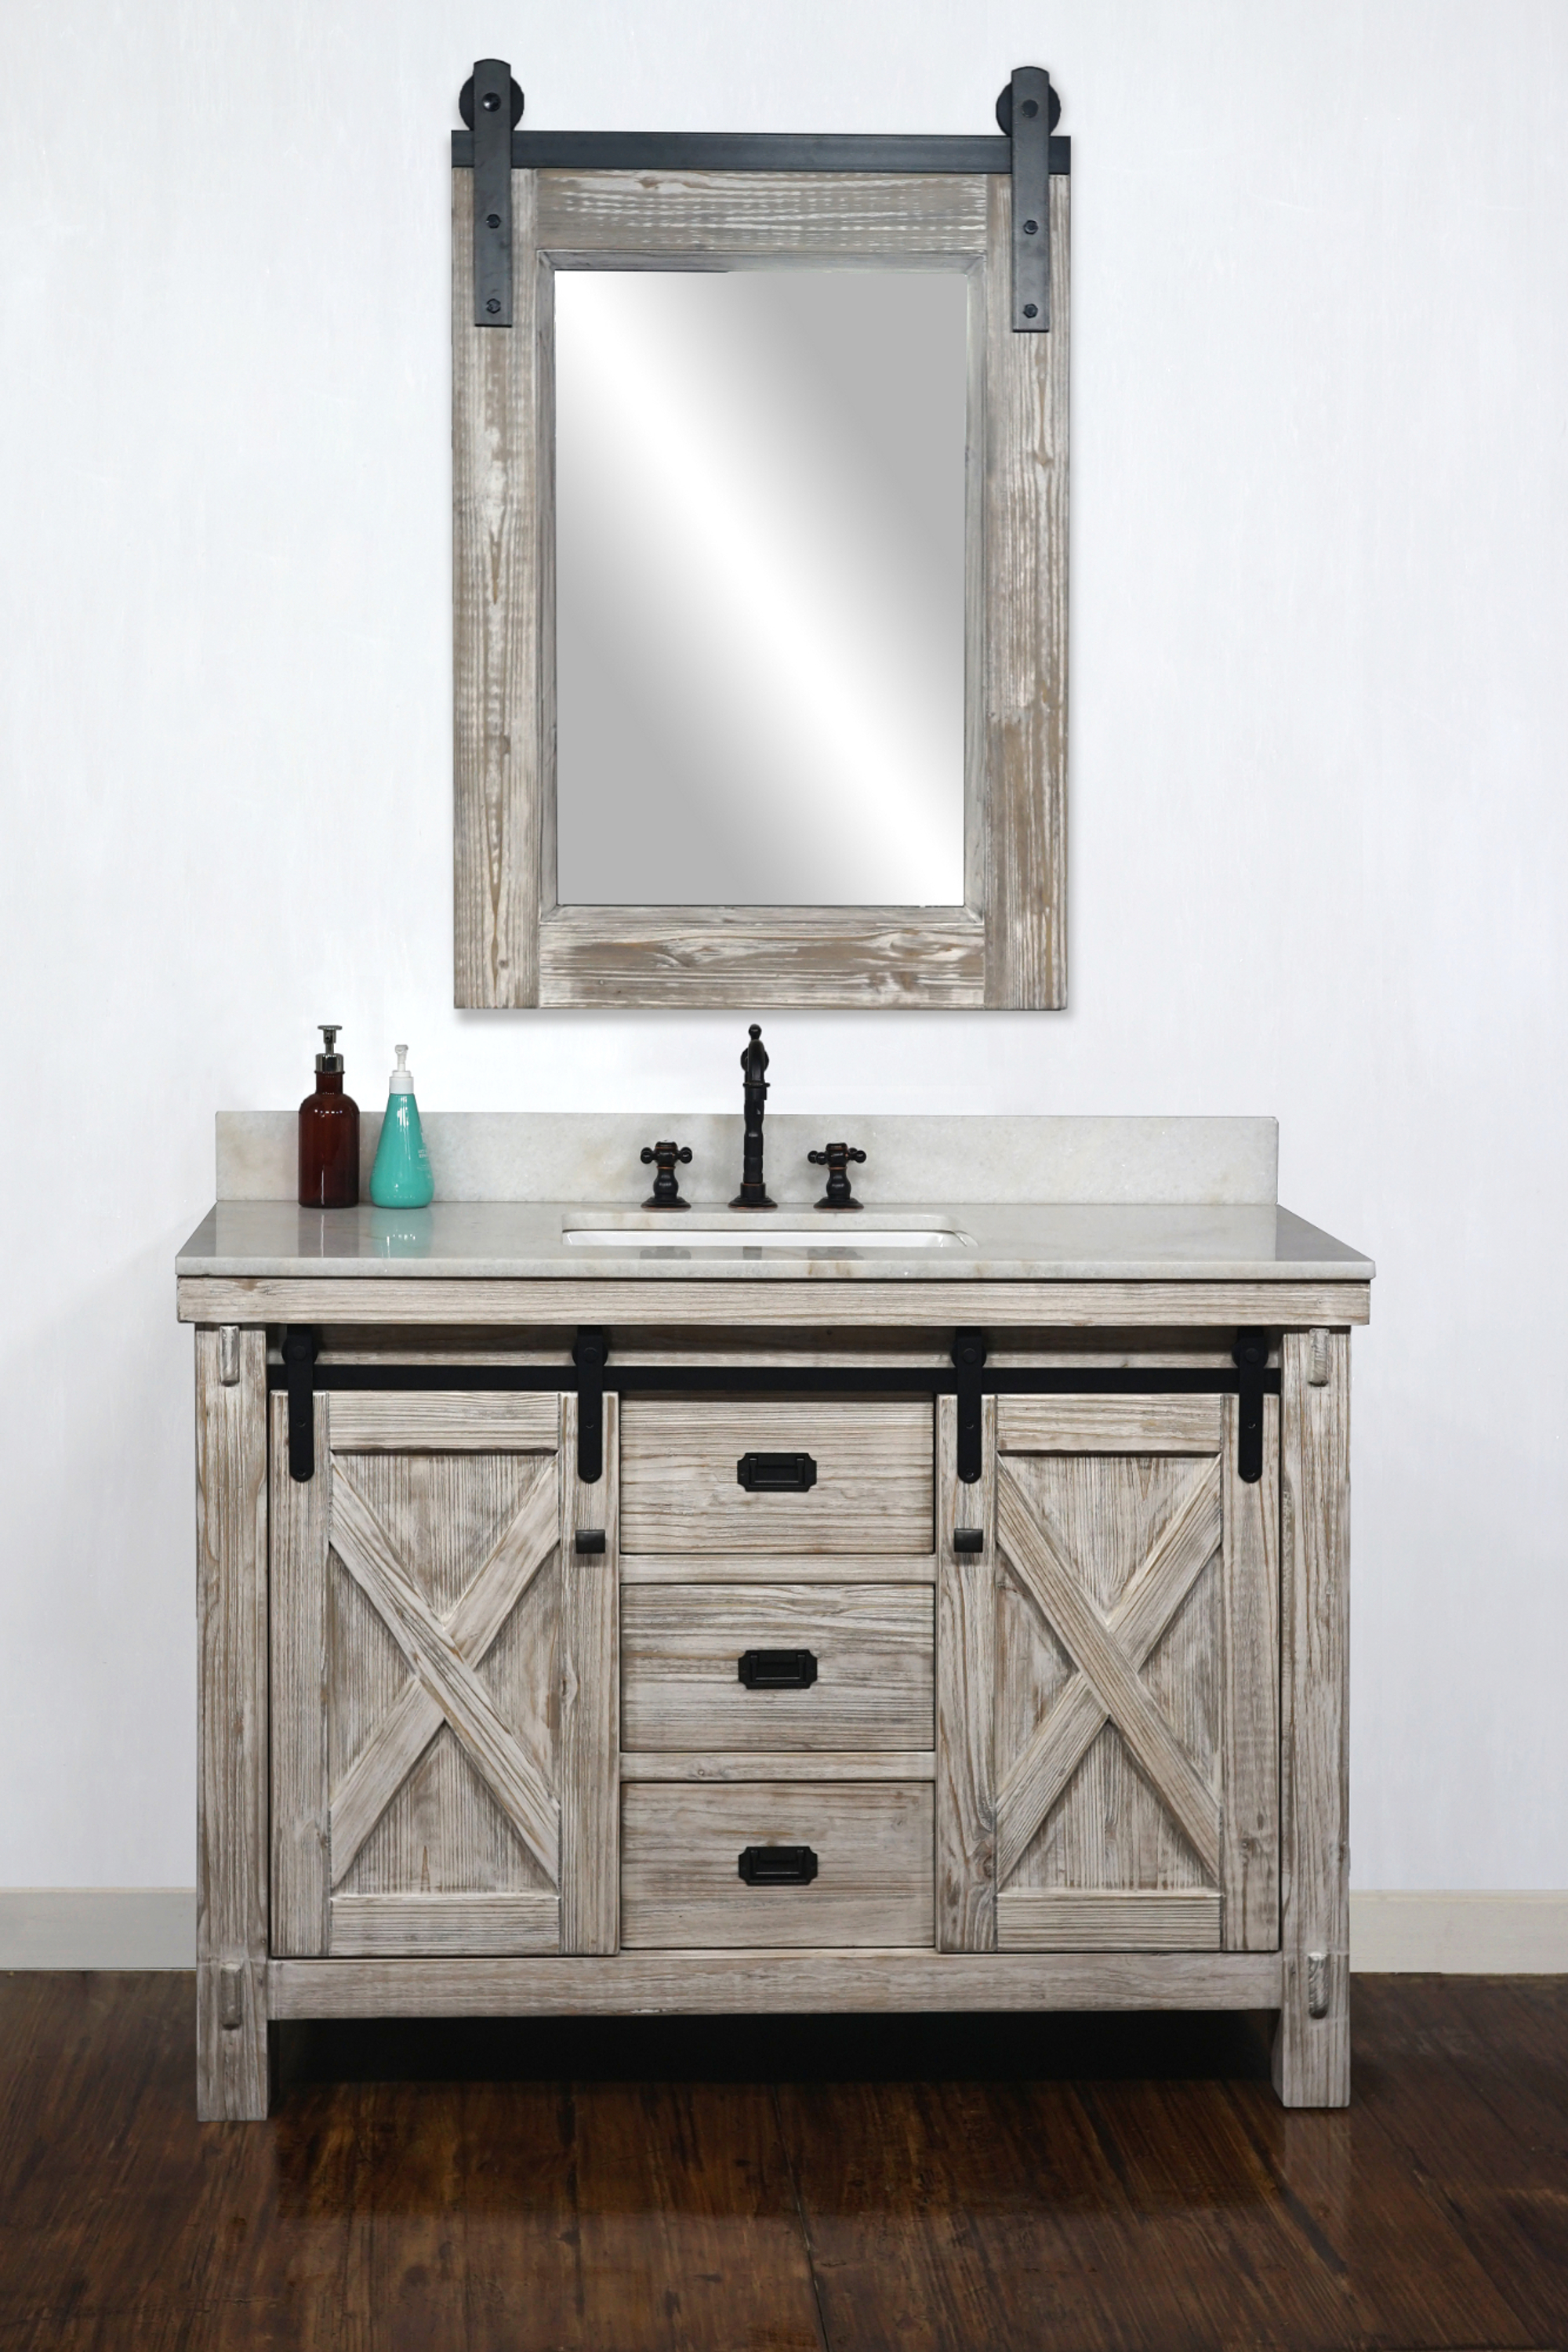 48" Rustic Solid Fir Barn Door Style Single Sink Vanity in White Washed - No Faucet with Countertop Options